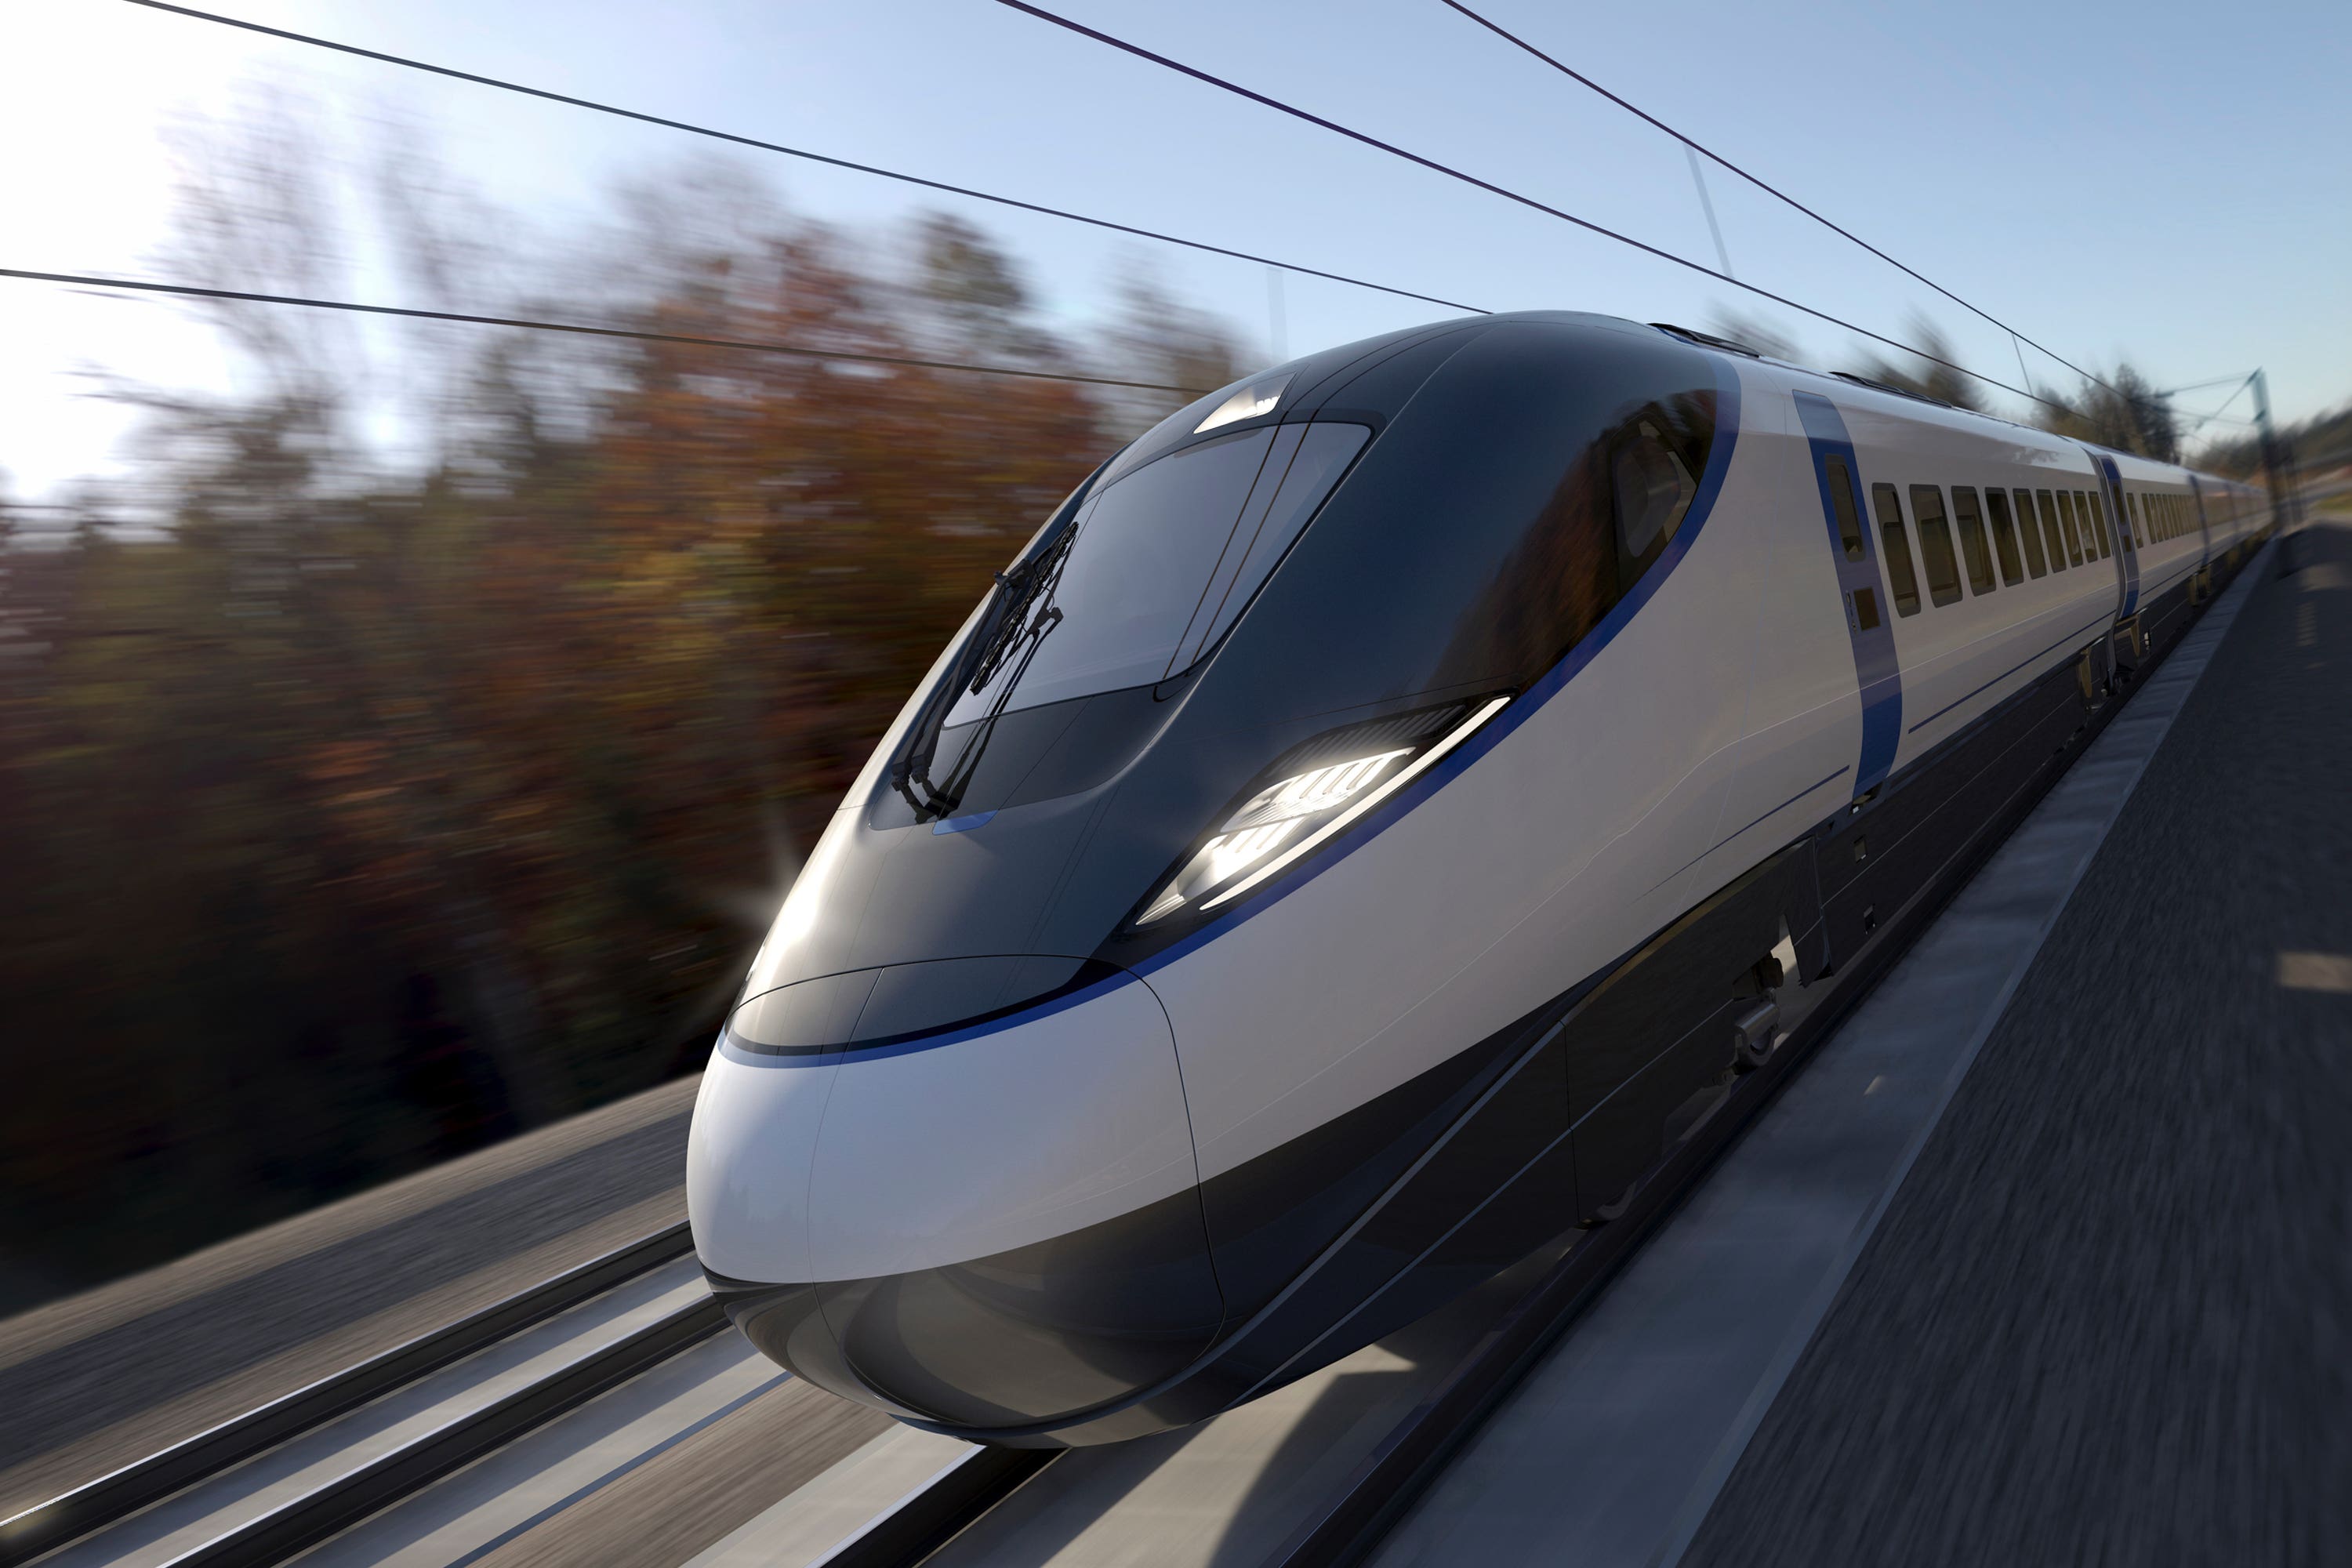 An early representation of what HS2 trains could look like